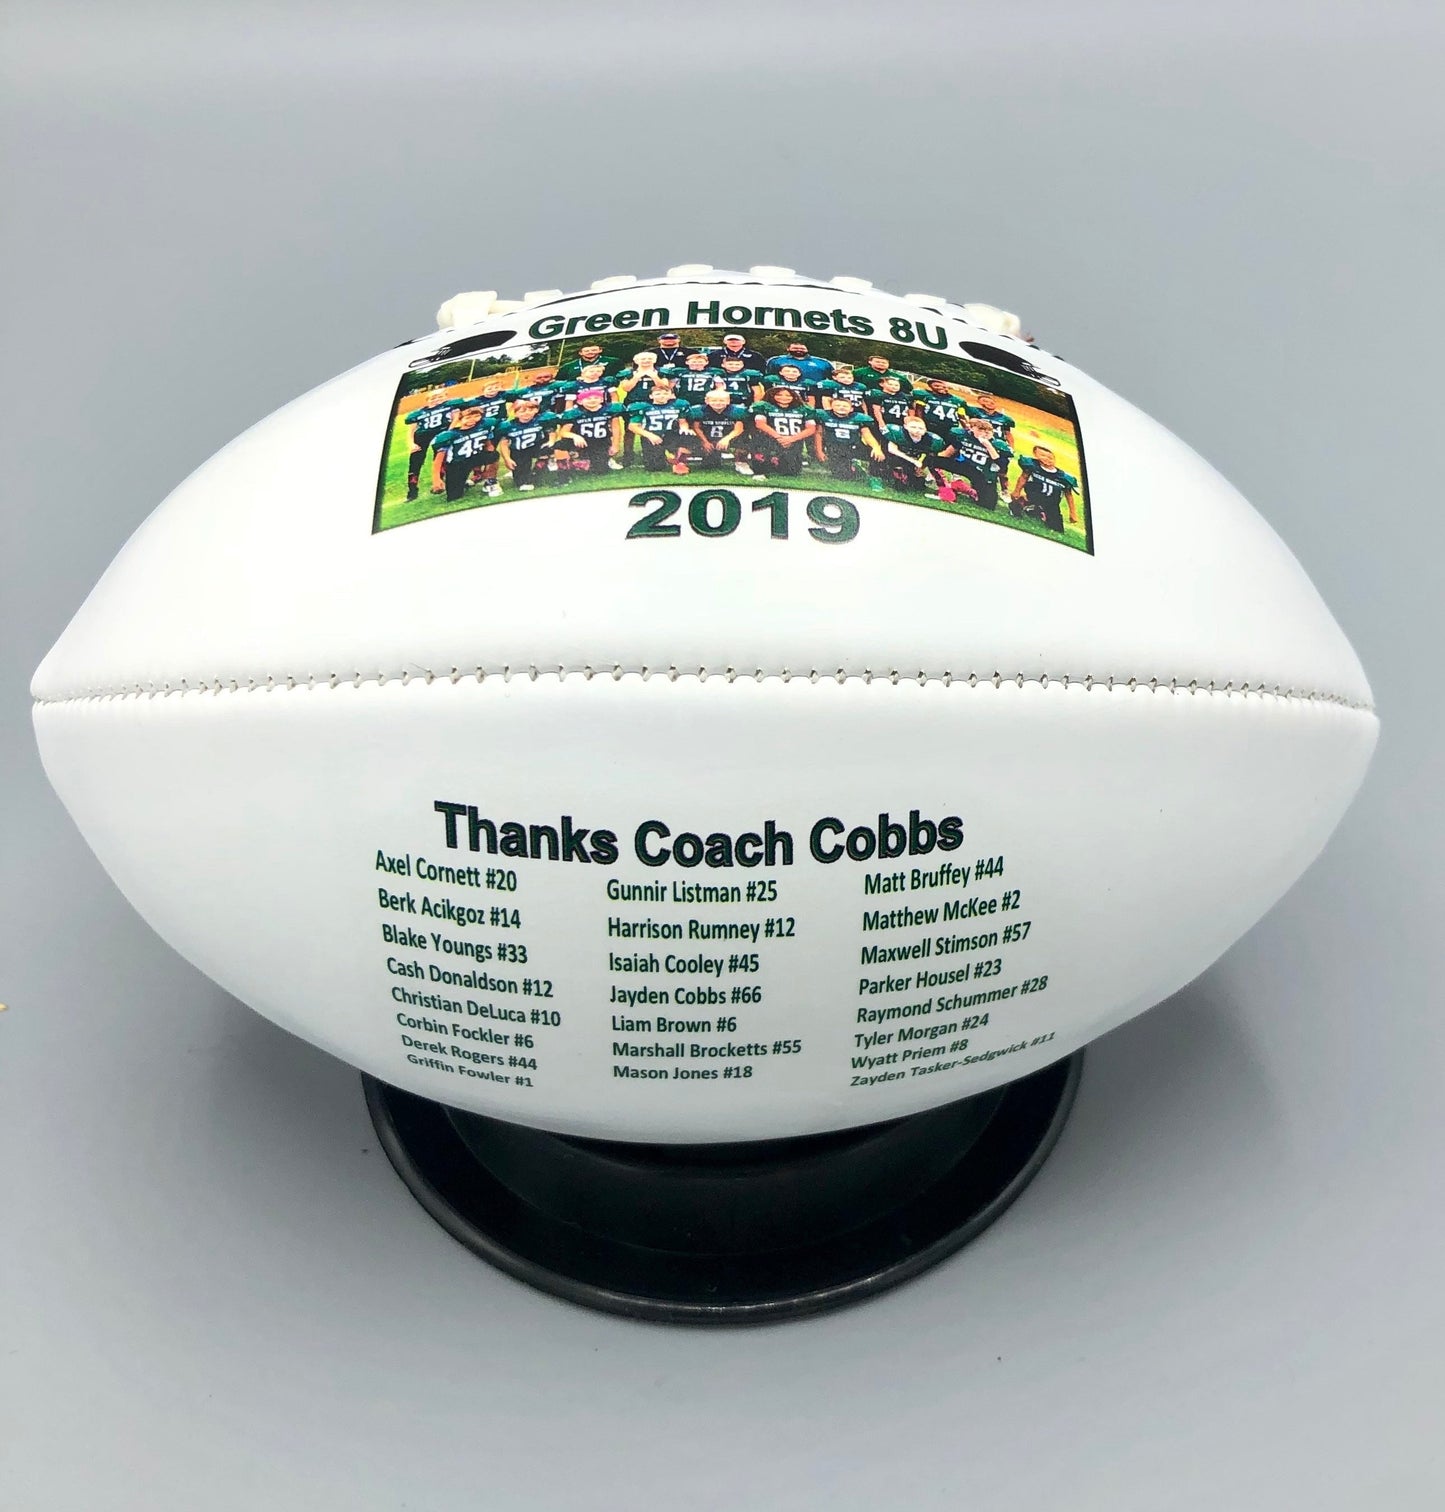 Personalized 2 Panel Print Mini Size Footballs for Coach's' Gift, Senior Gifts, Team Awards, Sponsor Gifts, Weddings and Football Gifts